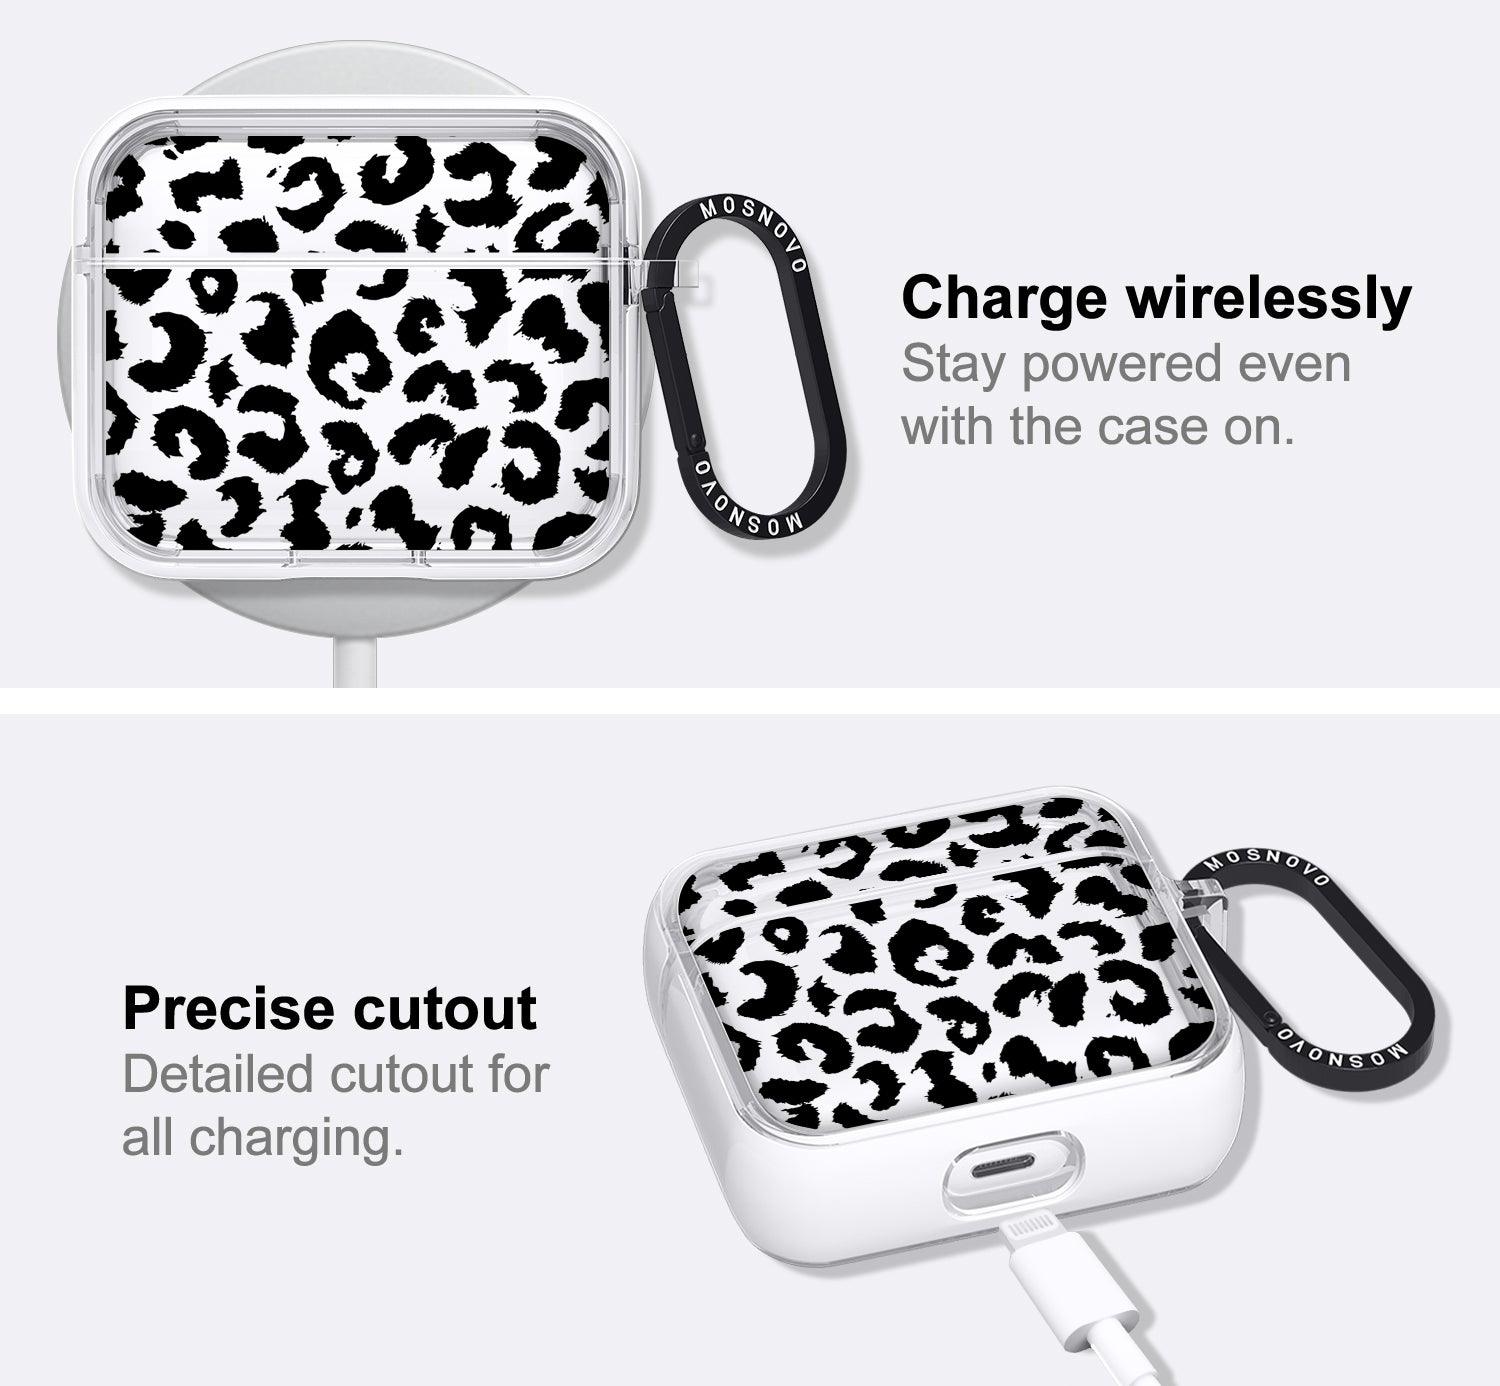 Black Leopard AirPods 3 Case (3rd Generation) - MOSNOVO